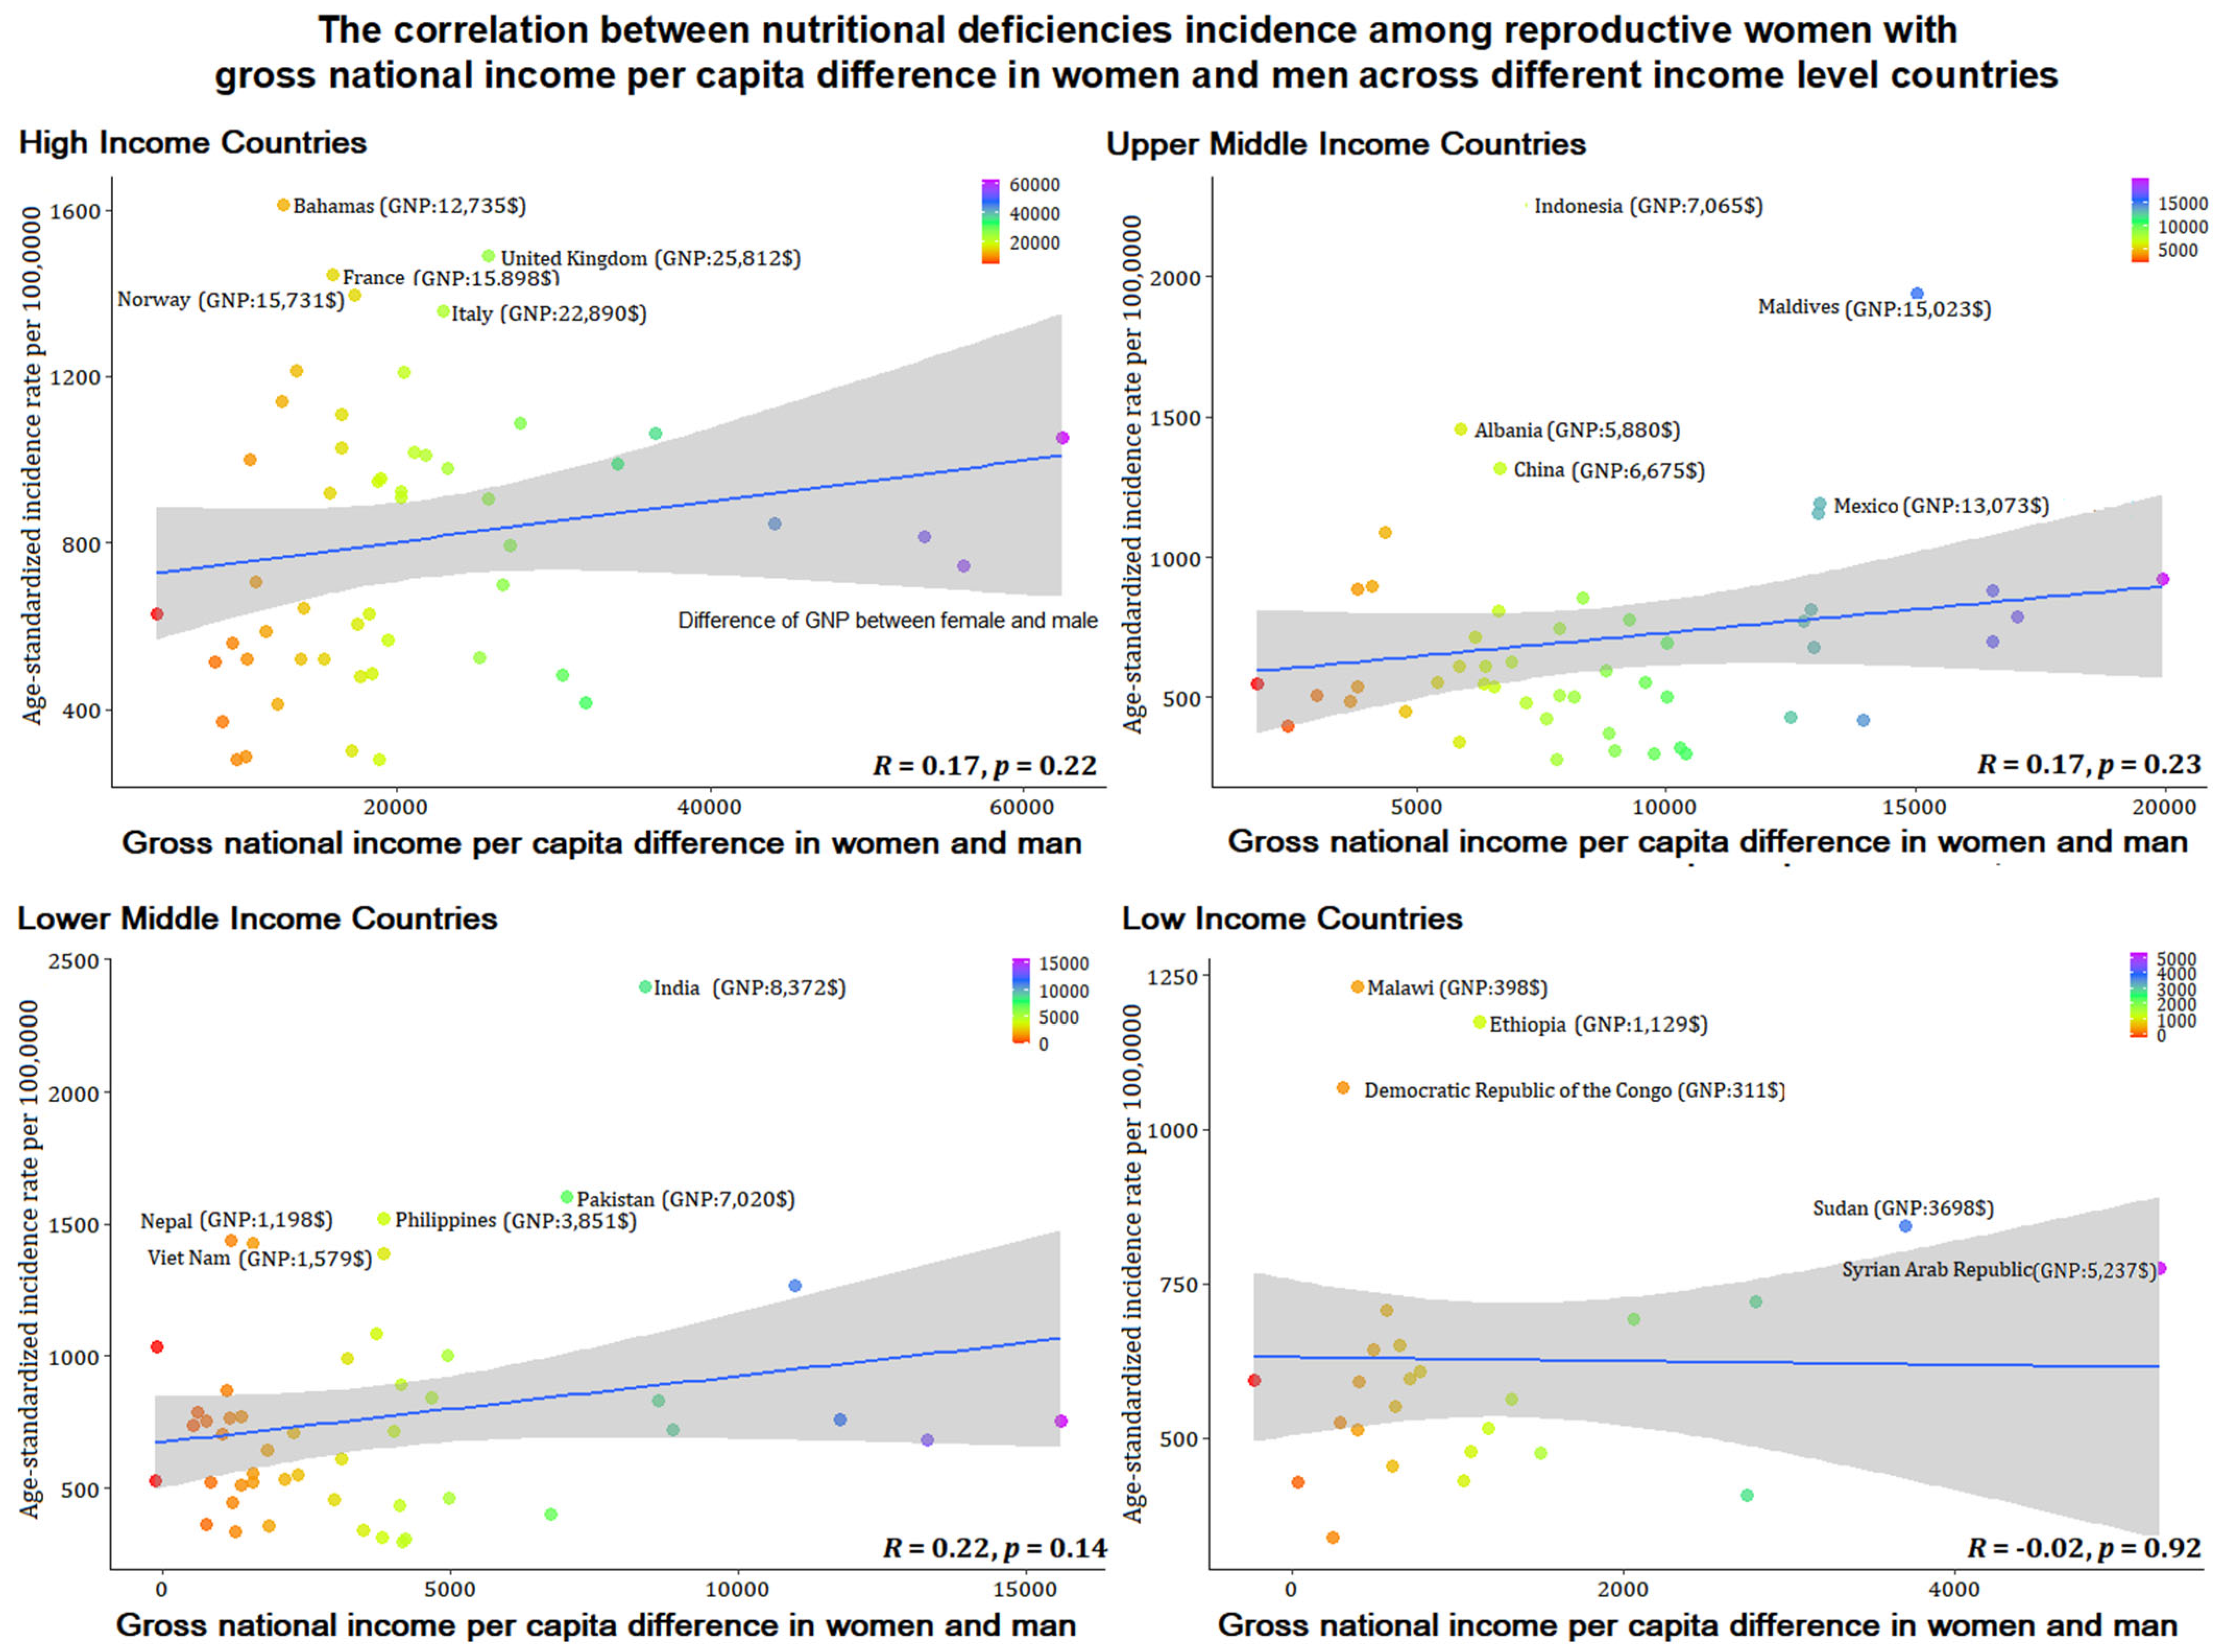 Nutrients Free Full-Text Global, Regional, and National Estimates of Nutritional Deficiency Burden among Reproductive Women from 2010 to 2019 picture